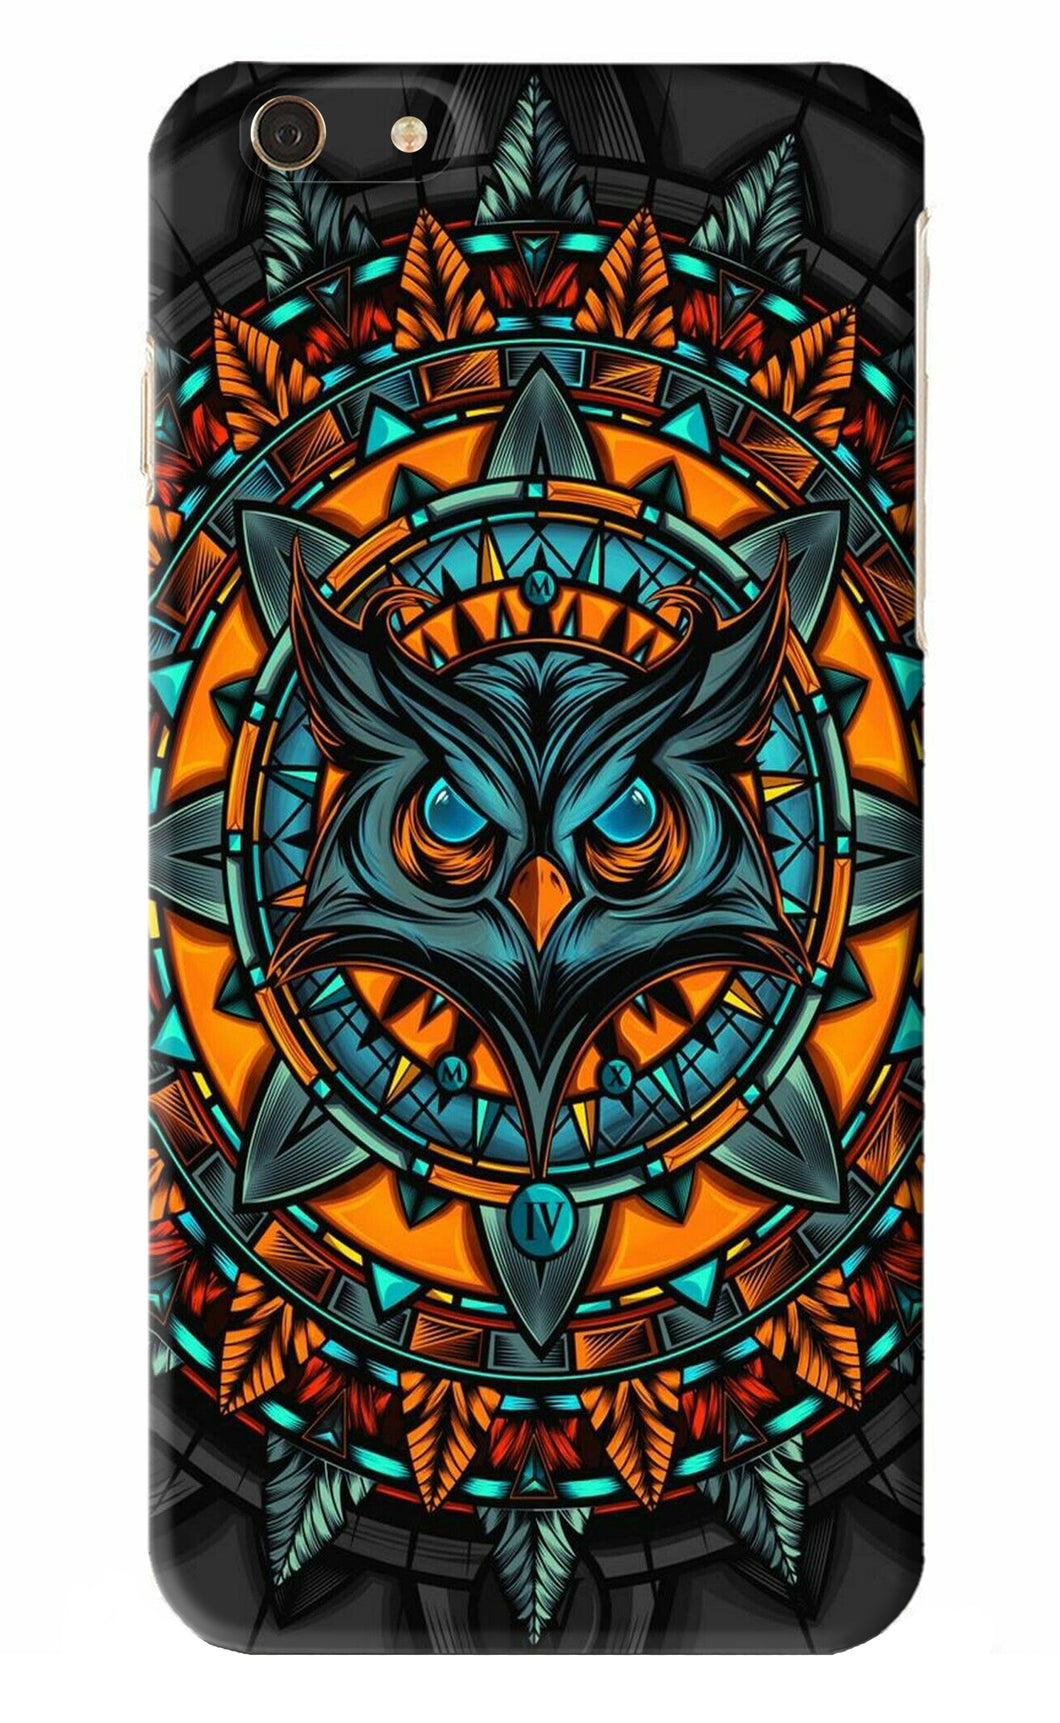 Angry Owl Art iPhone 6S Plus Back Skin Wrap